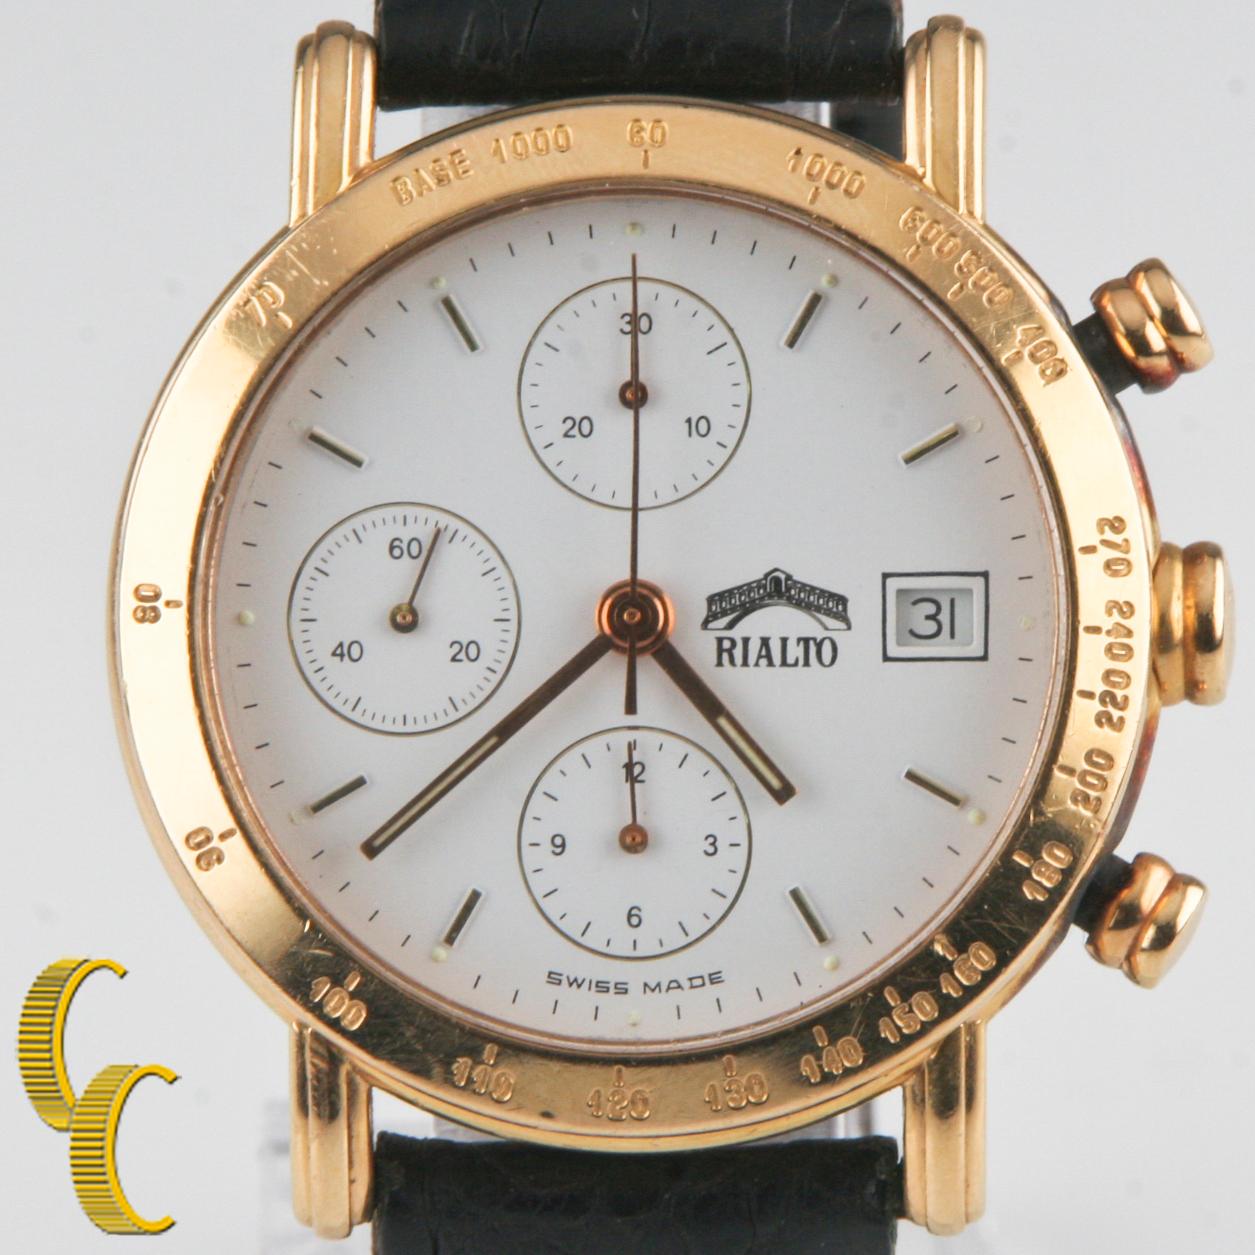 18k Yellow Gold Case w/ Tachymeter Bezel
37 mm in Diameter (39 mm w/ Crown)
Lug-to-Lug Distance = 42 mm
Thickness = 12 mm
White Chronograph Dial w/ Gold Tic Marks & Hands (S, M, H)
Luminous Accents on Tic Marks and Hands
Date Feature at 3:00
31 mm